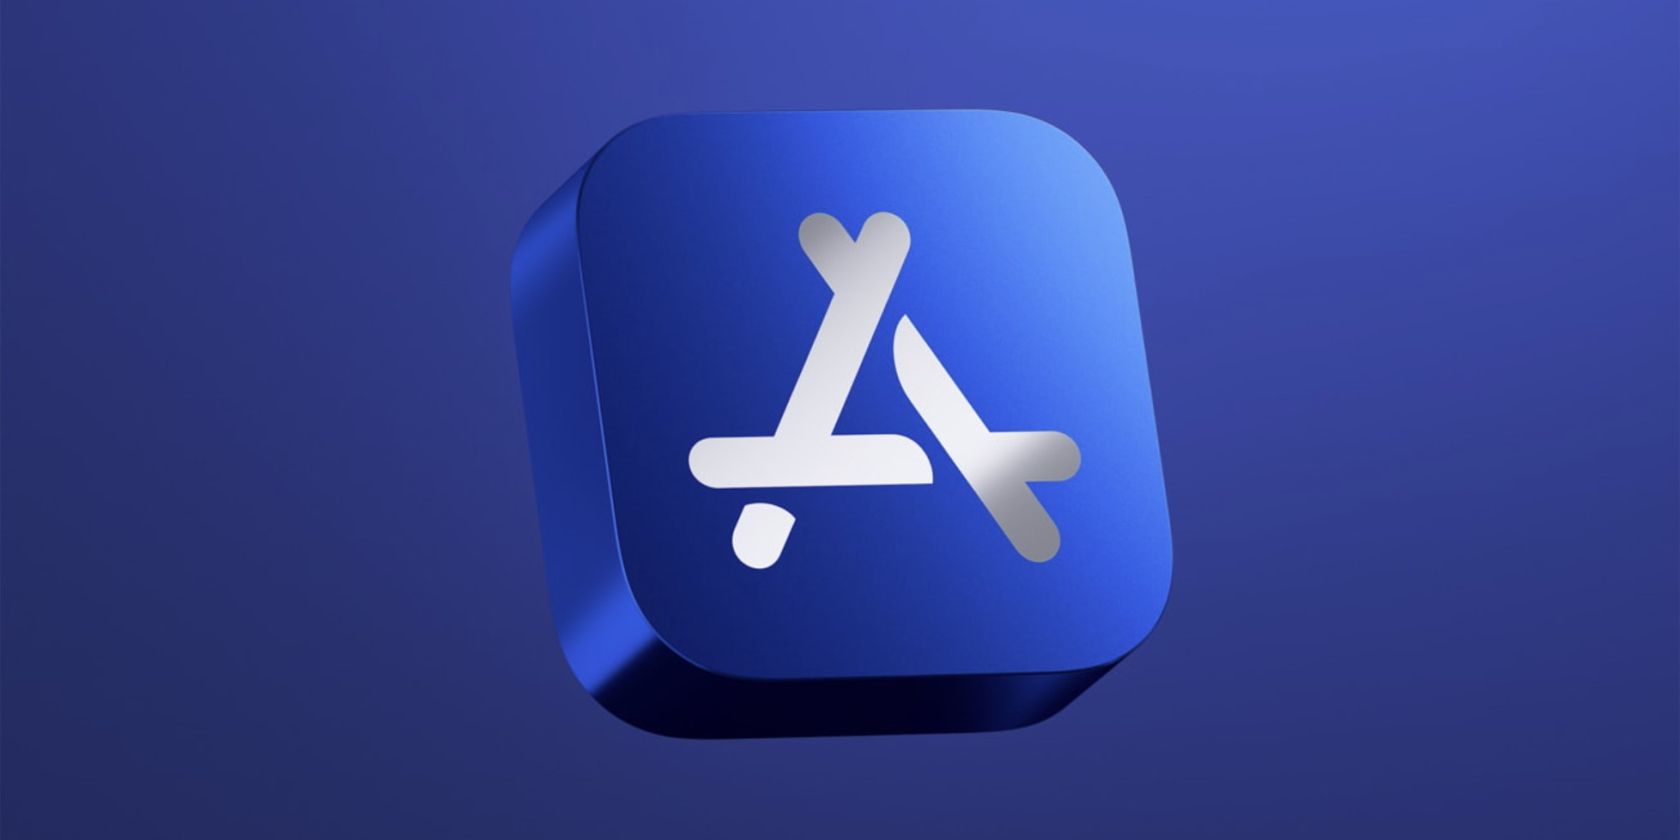 App Store icon on a blue background